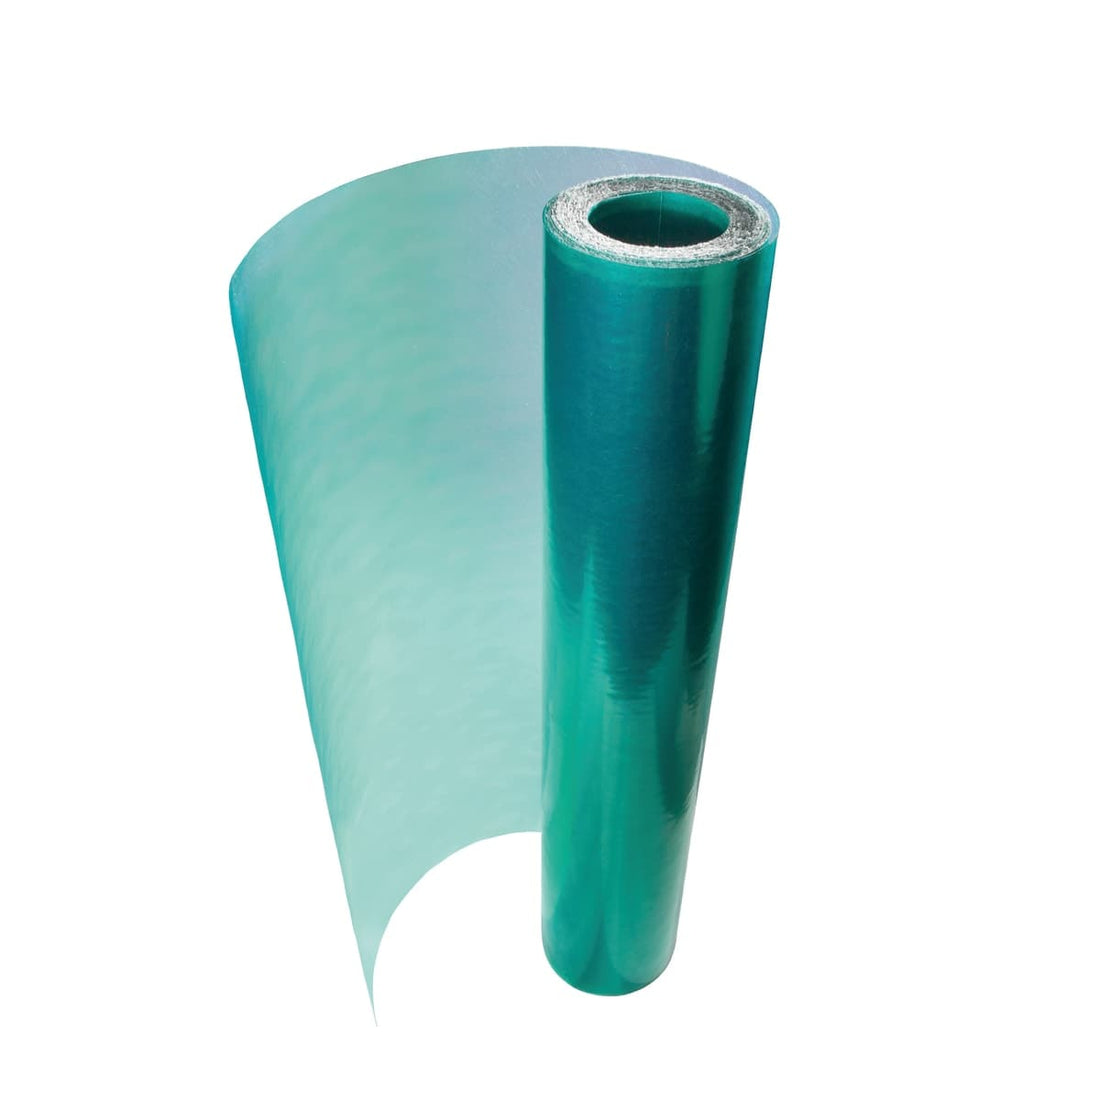 Smooth polyester roll 1x5 m green - best price from Maltashopper.com BR450001322